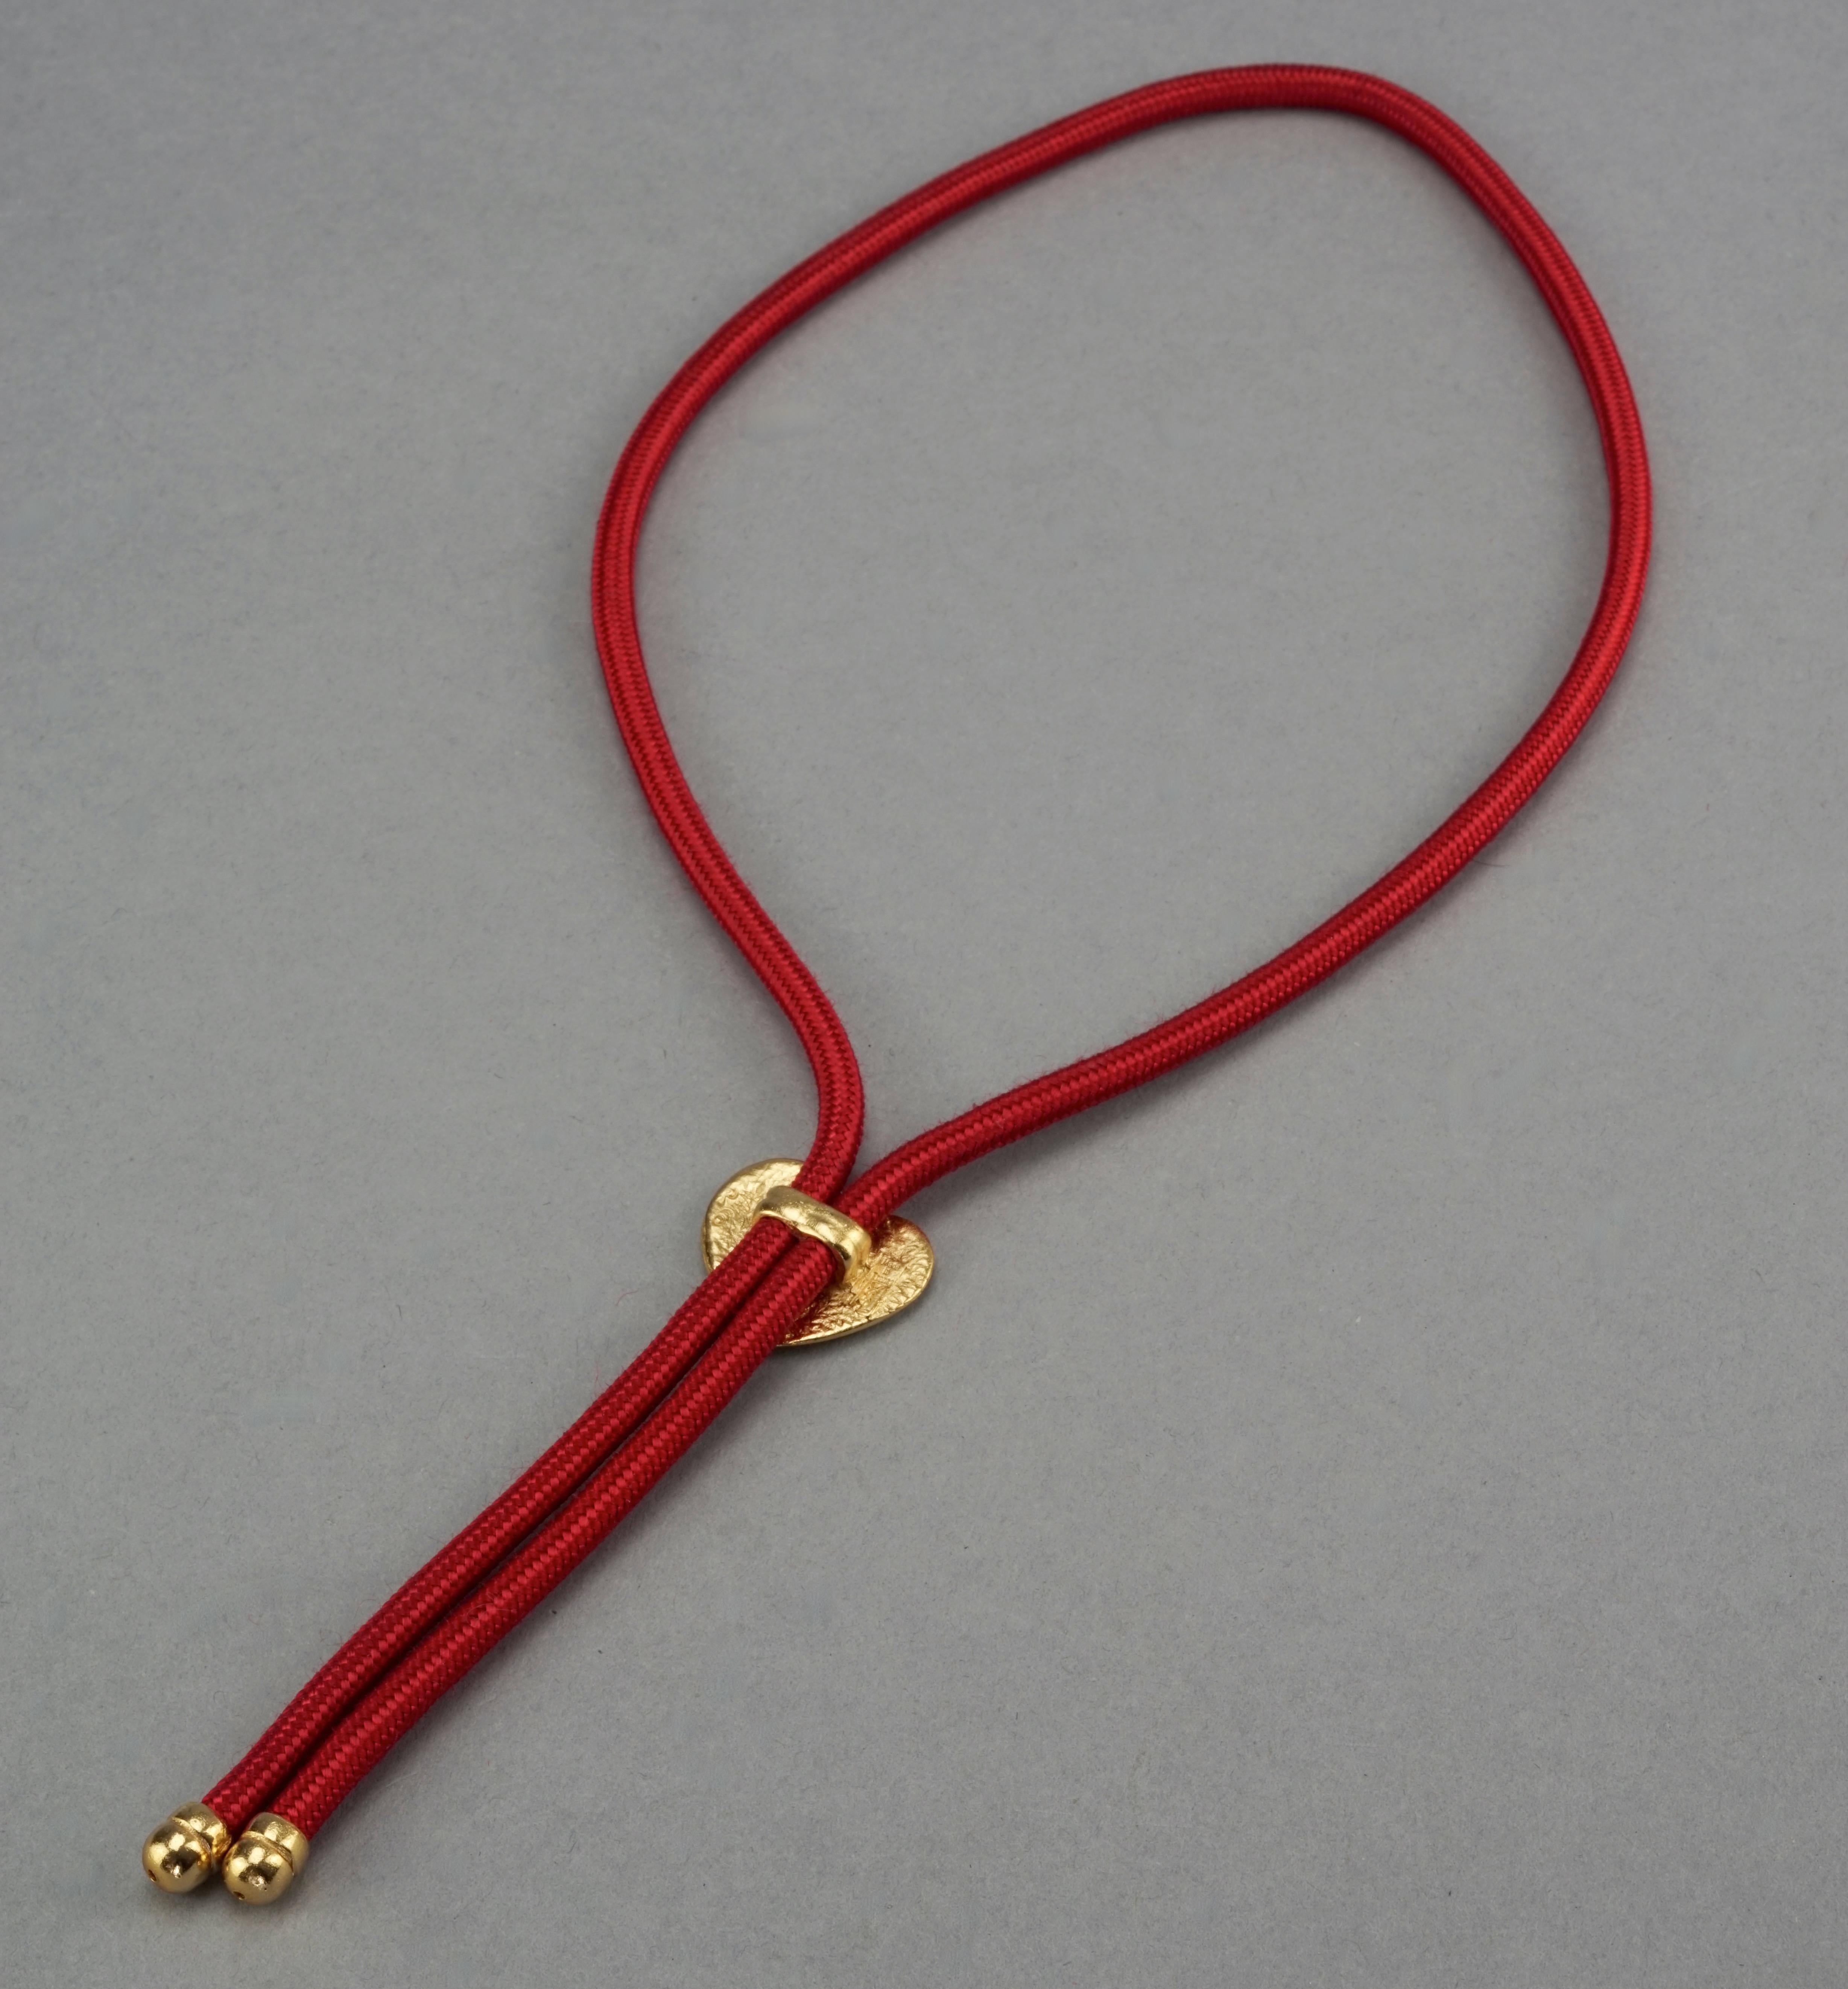 Vintage YVES SAINT LAURENT Ysl Love Heart Red Lariat Rope Necklace 2